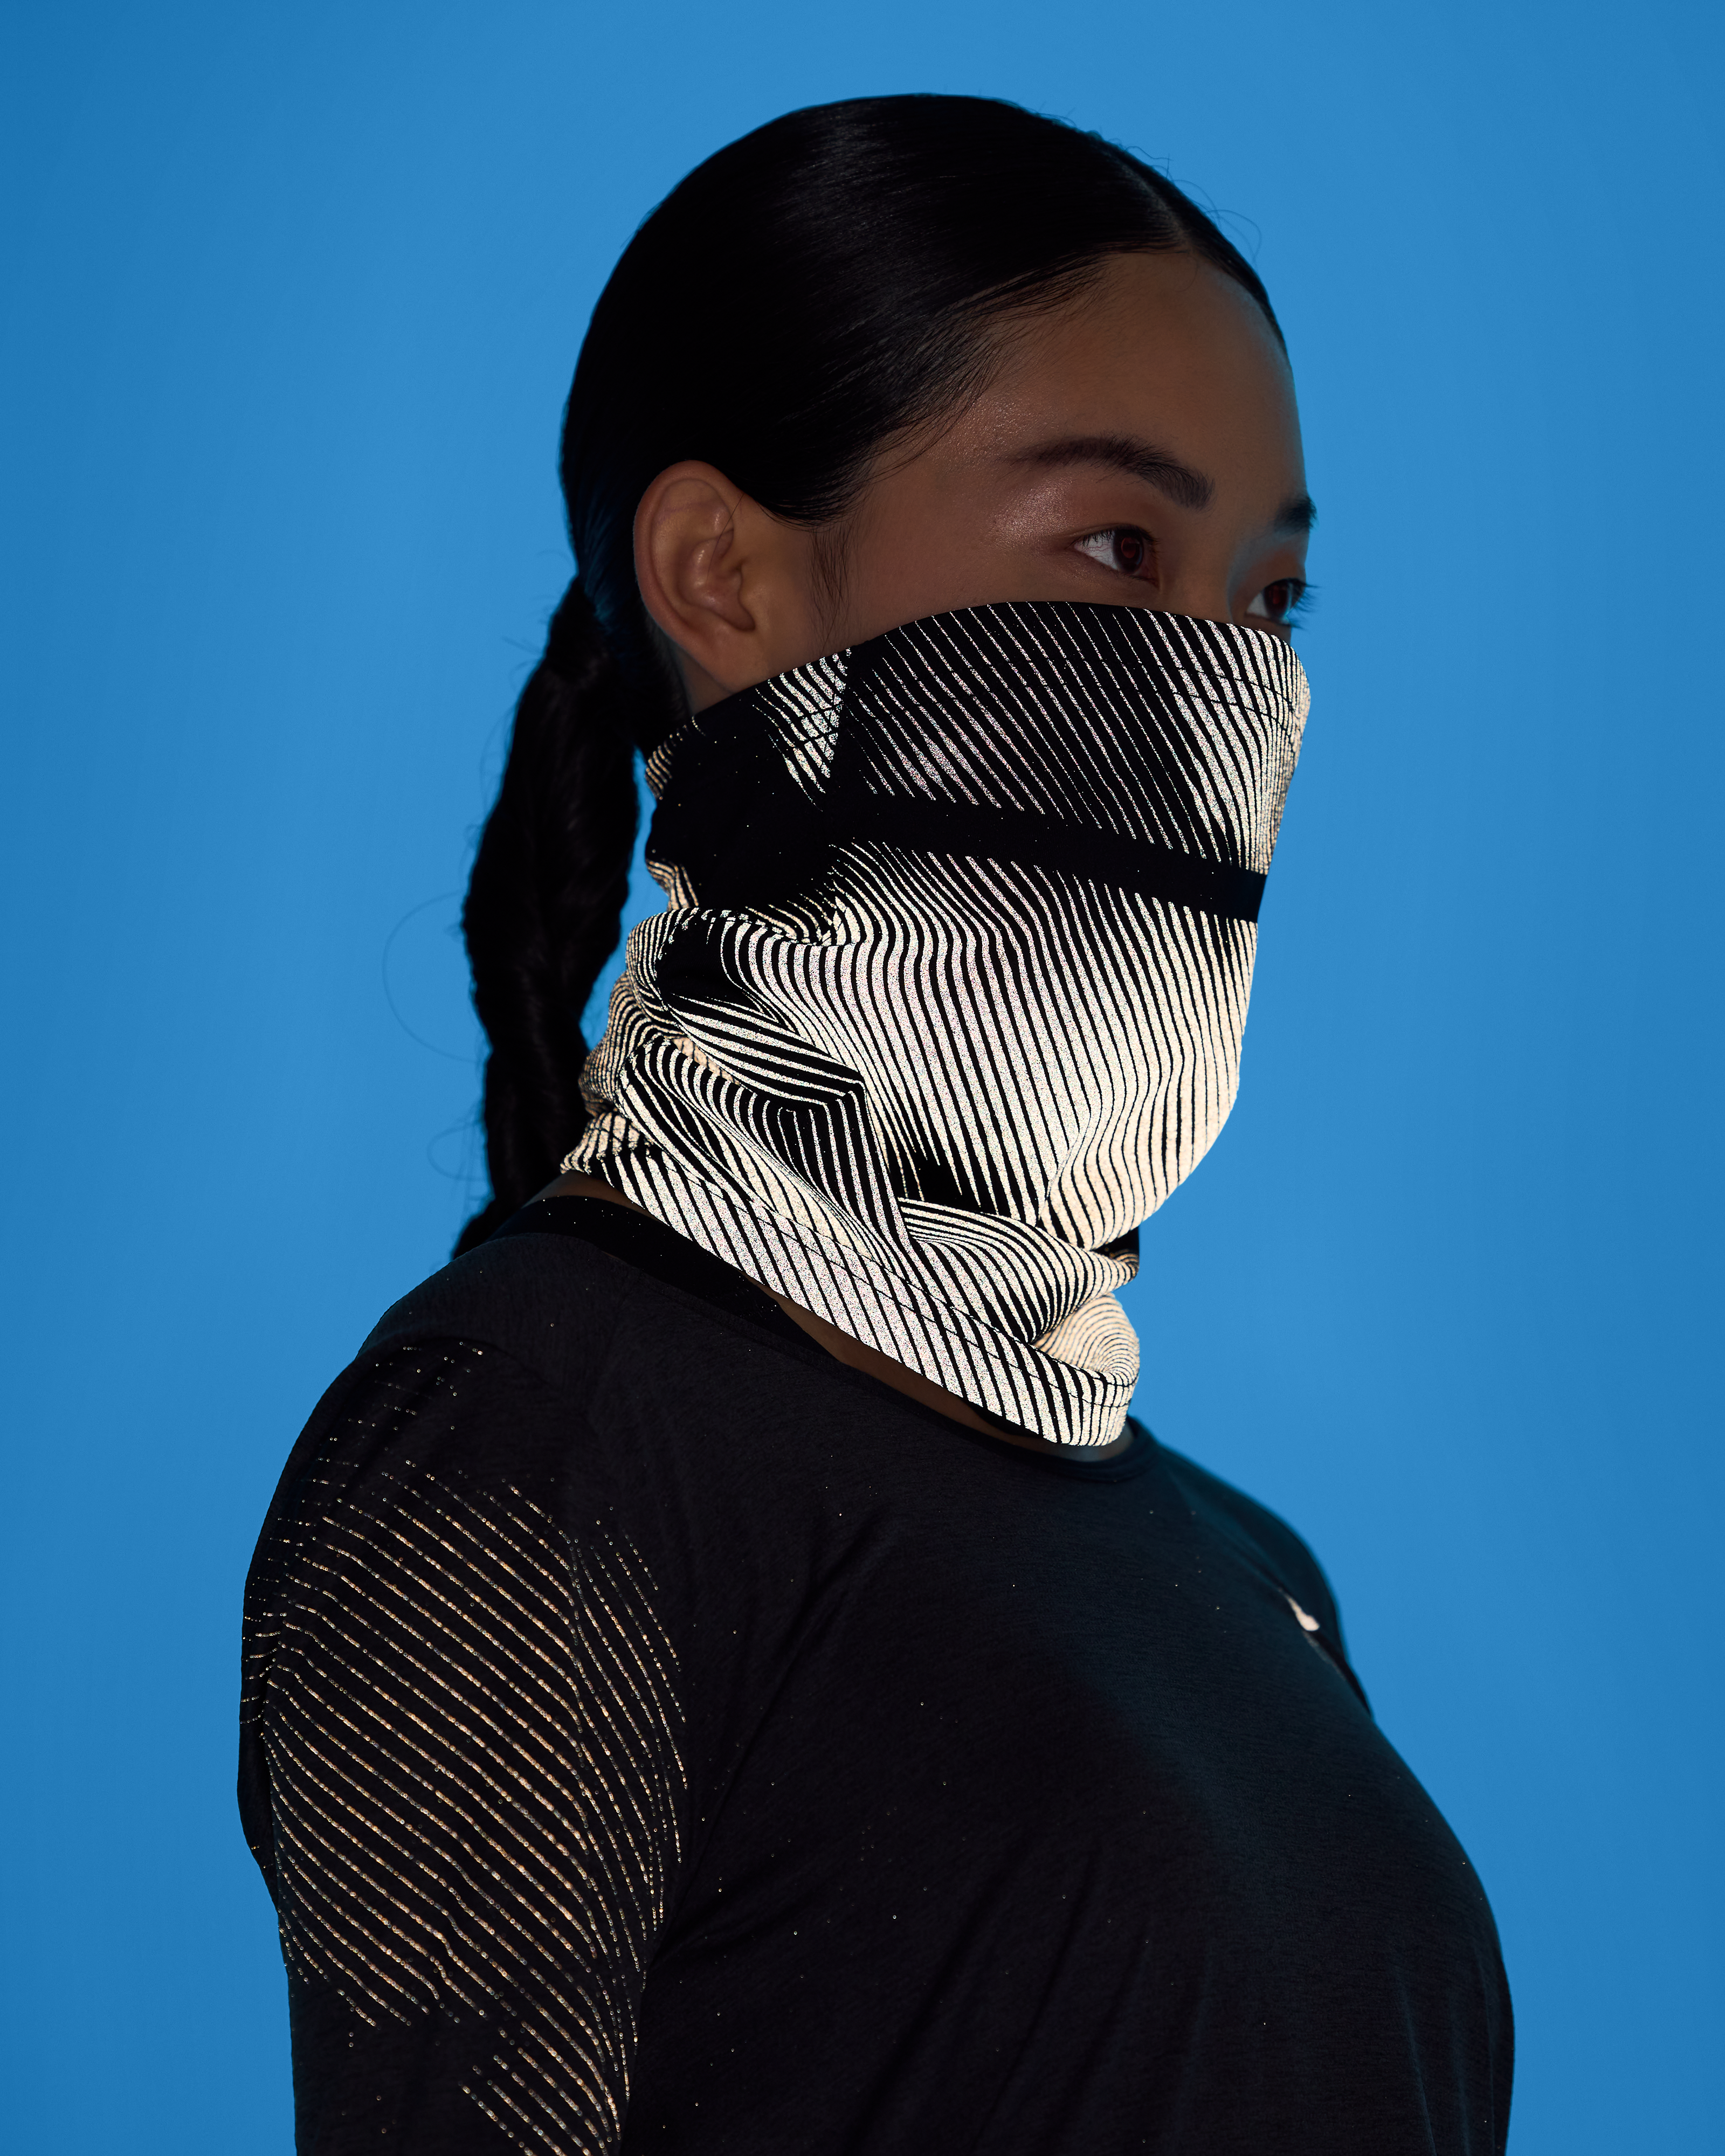 The North Face Cache-cou Neck Gaiter